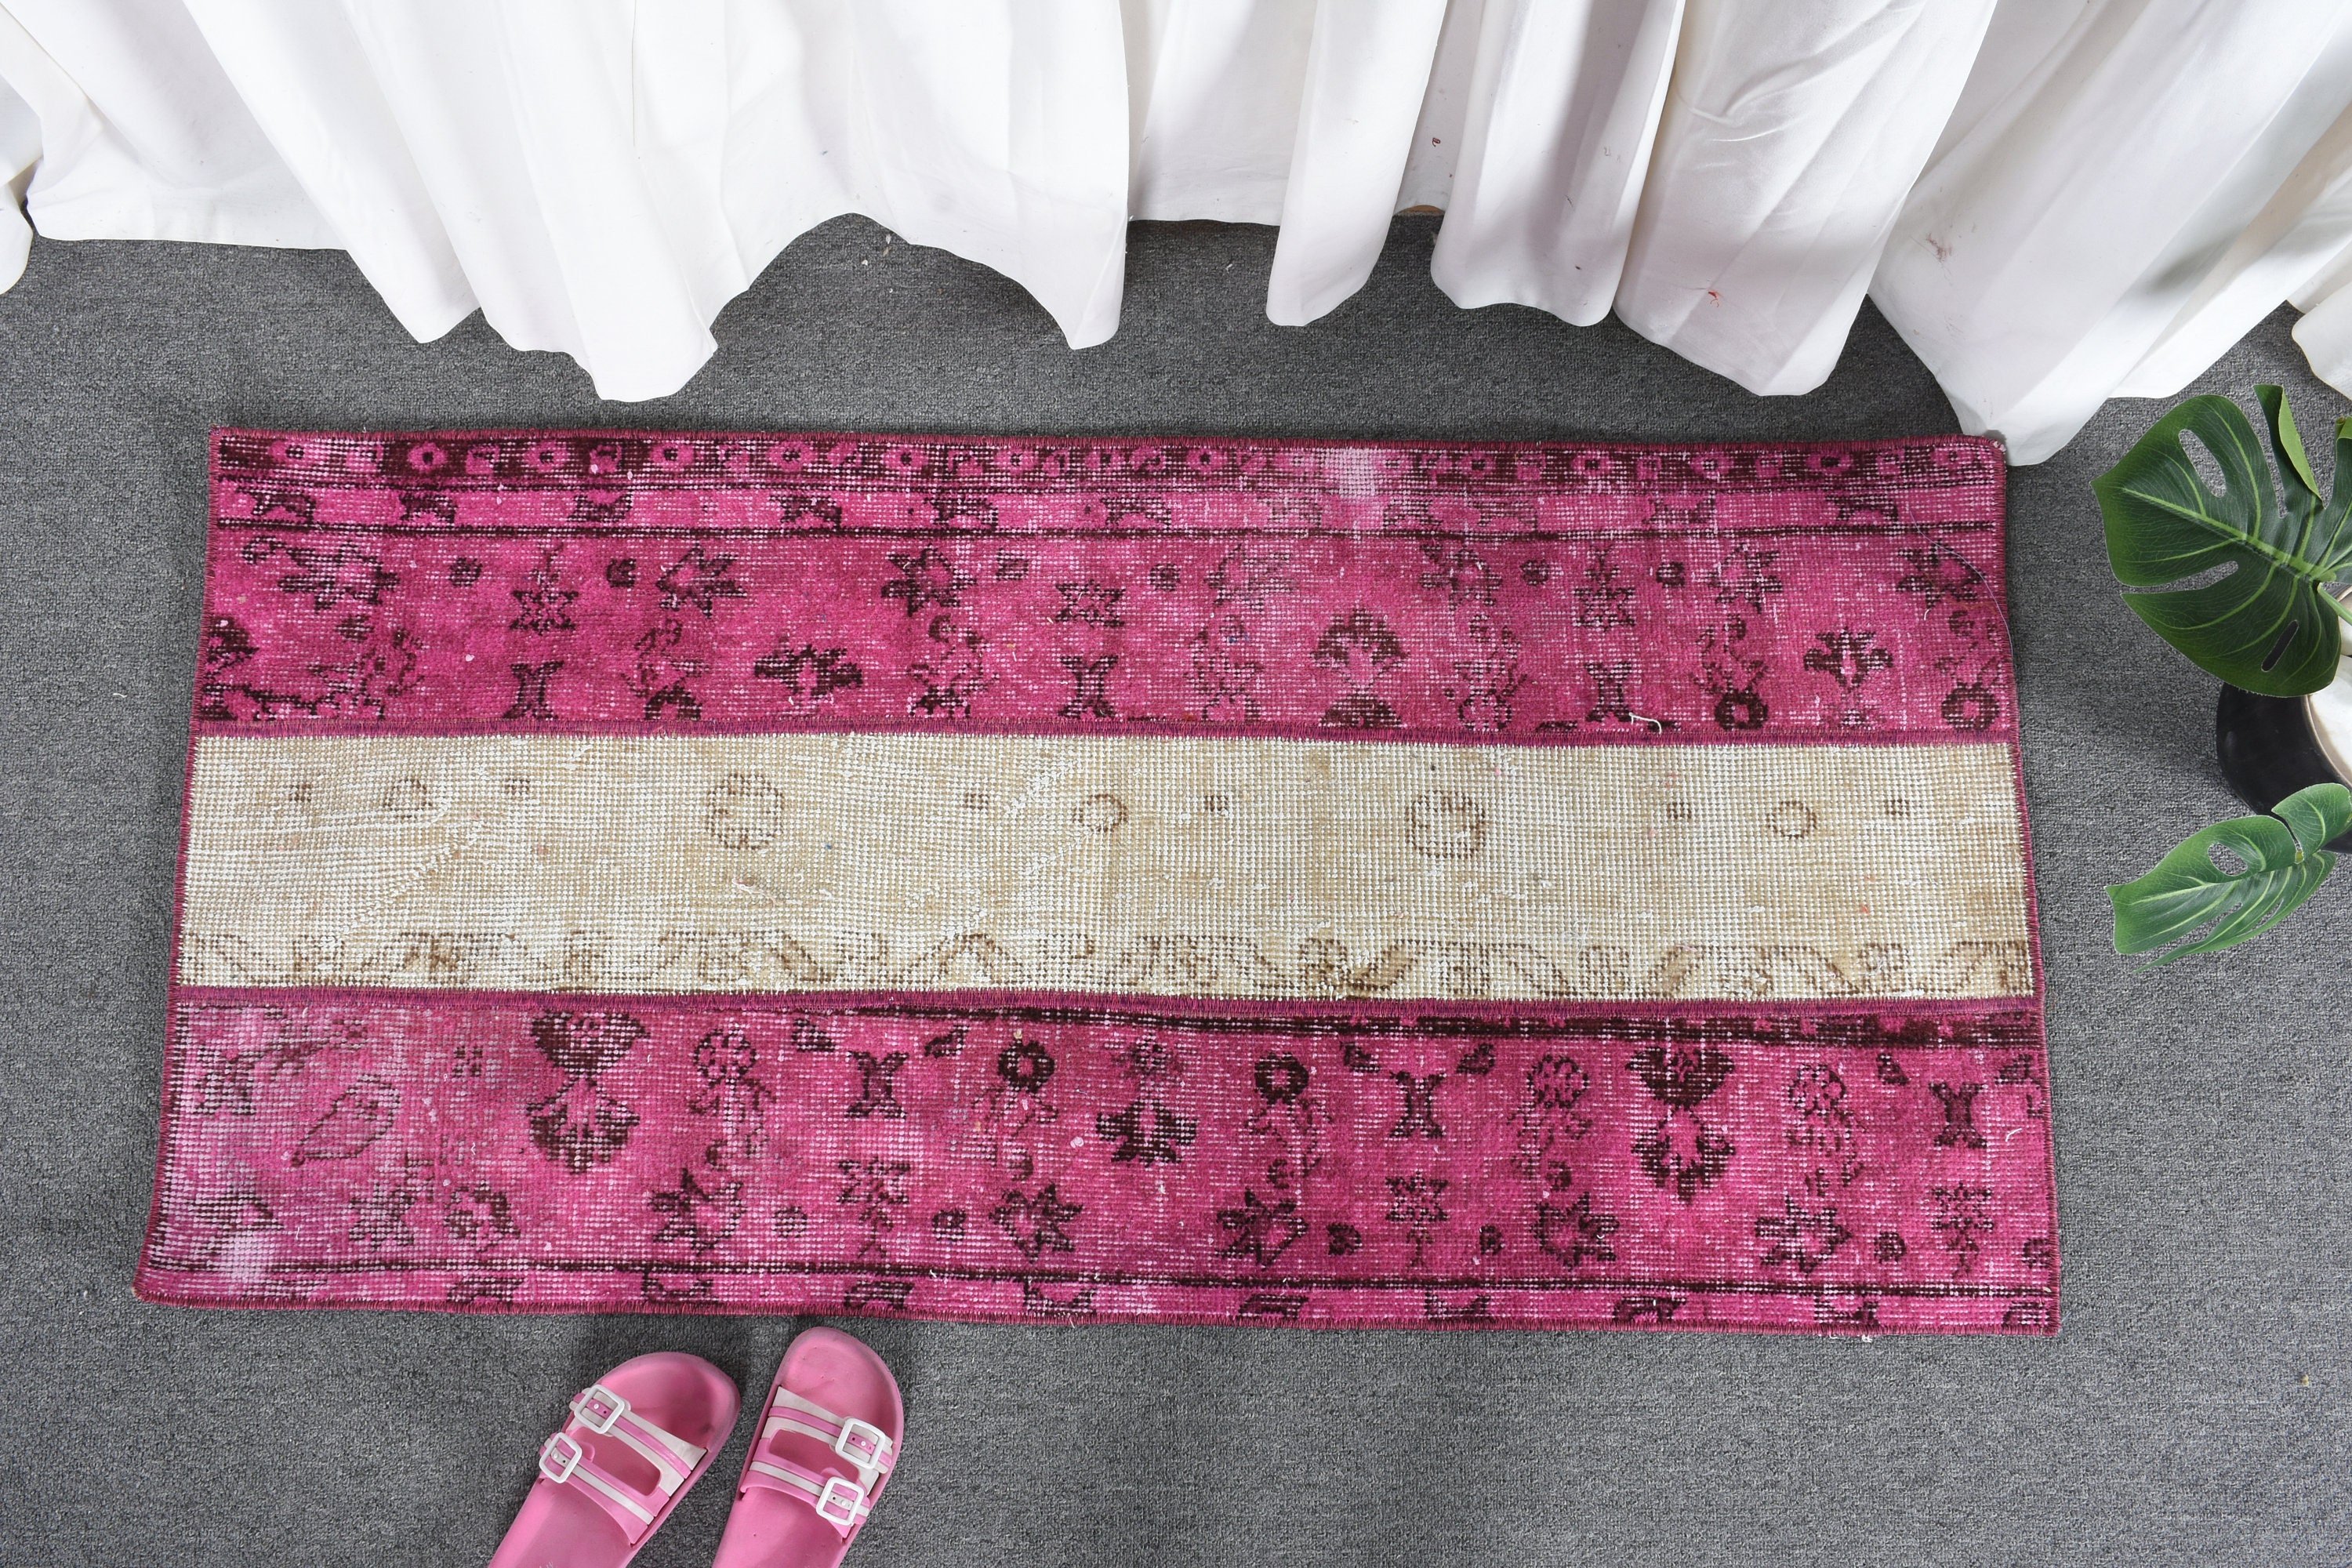 2x4.1 ft Small Rug, Moroccan Rug, Turkish Rug, Vintage Rugs, Rugs for Bath, Wall Hanging Rug, Wool Rugs, Pink Kitchen Rugs, Car Mat Rugs